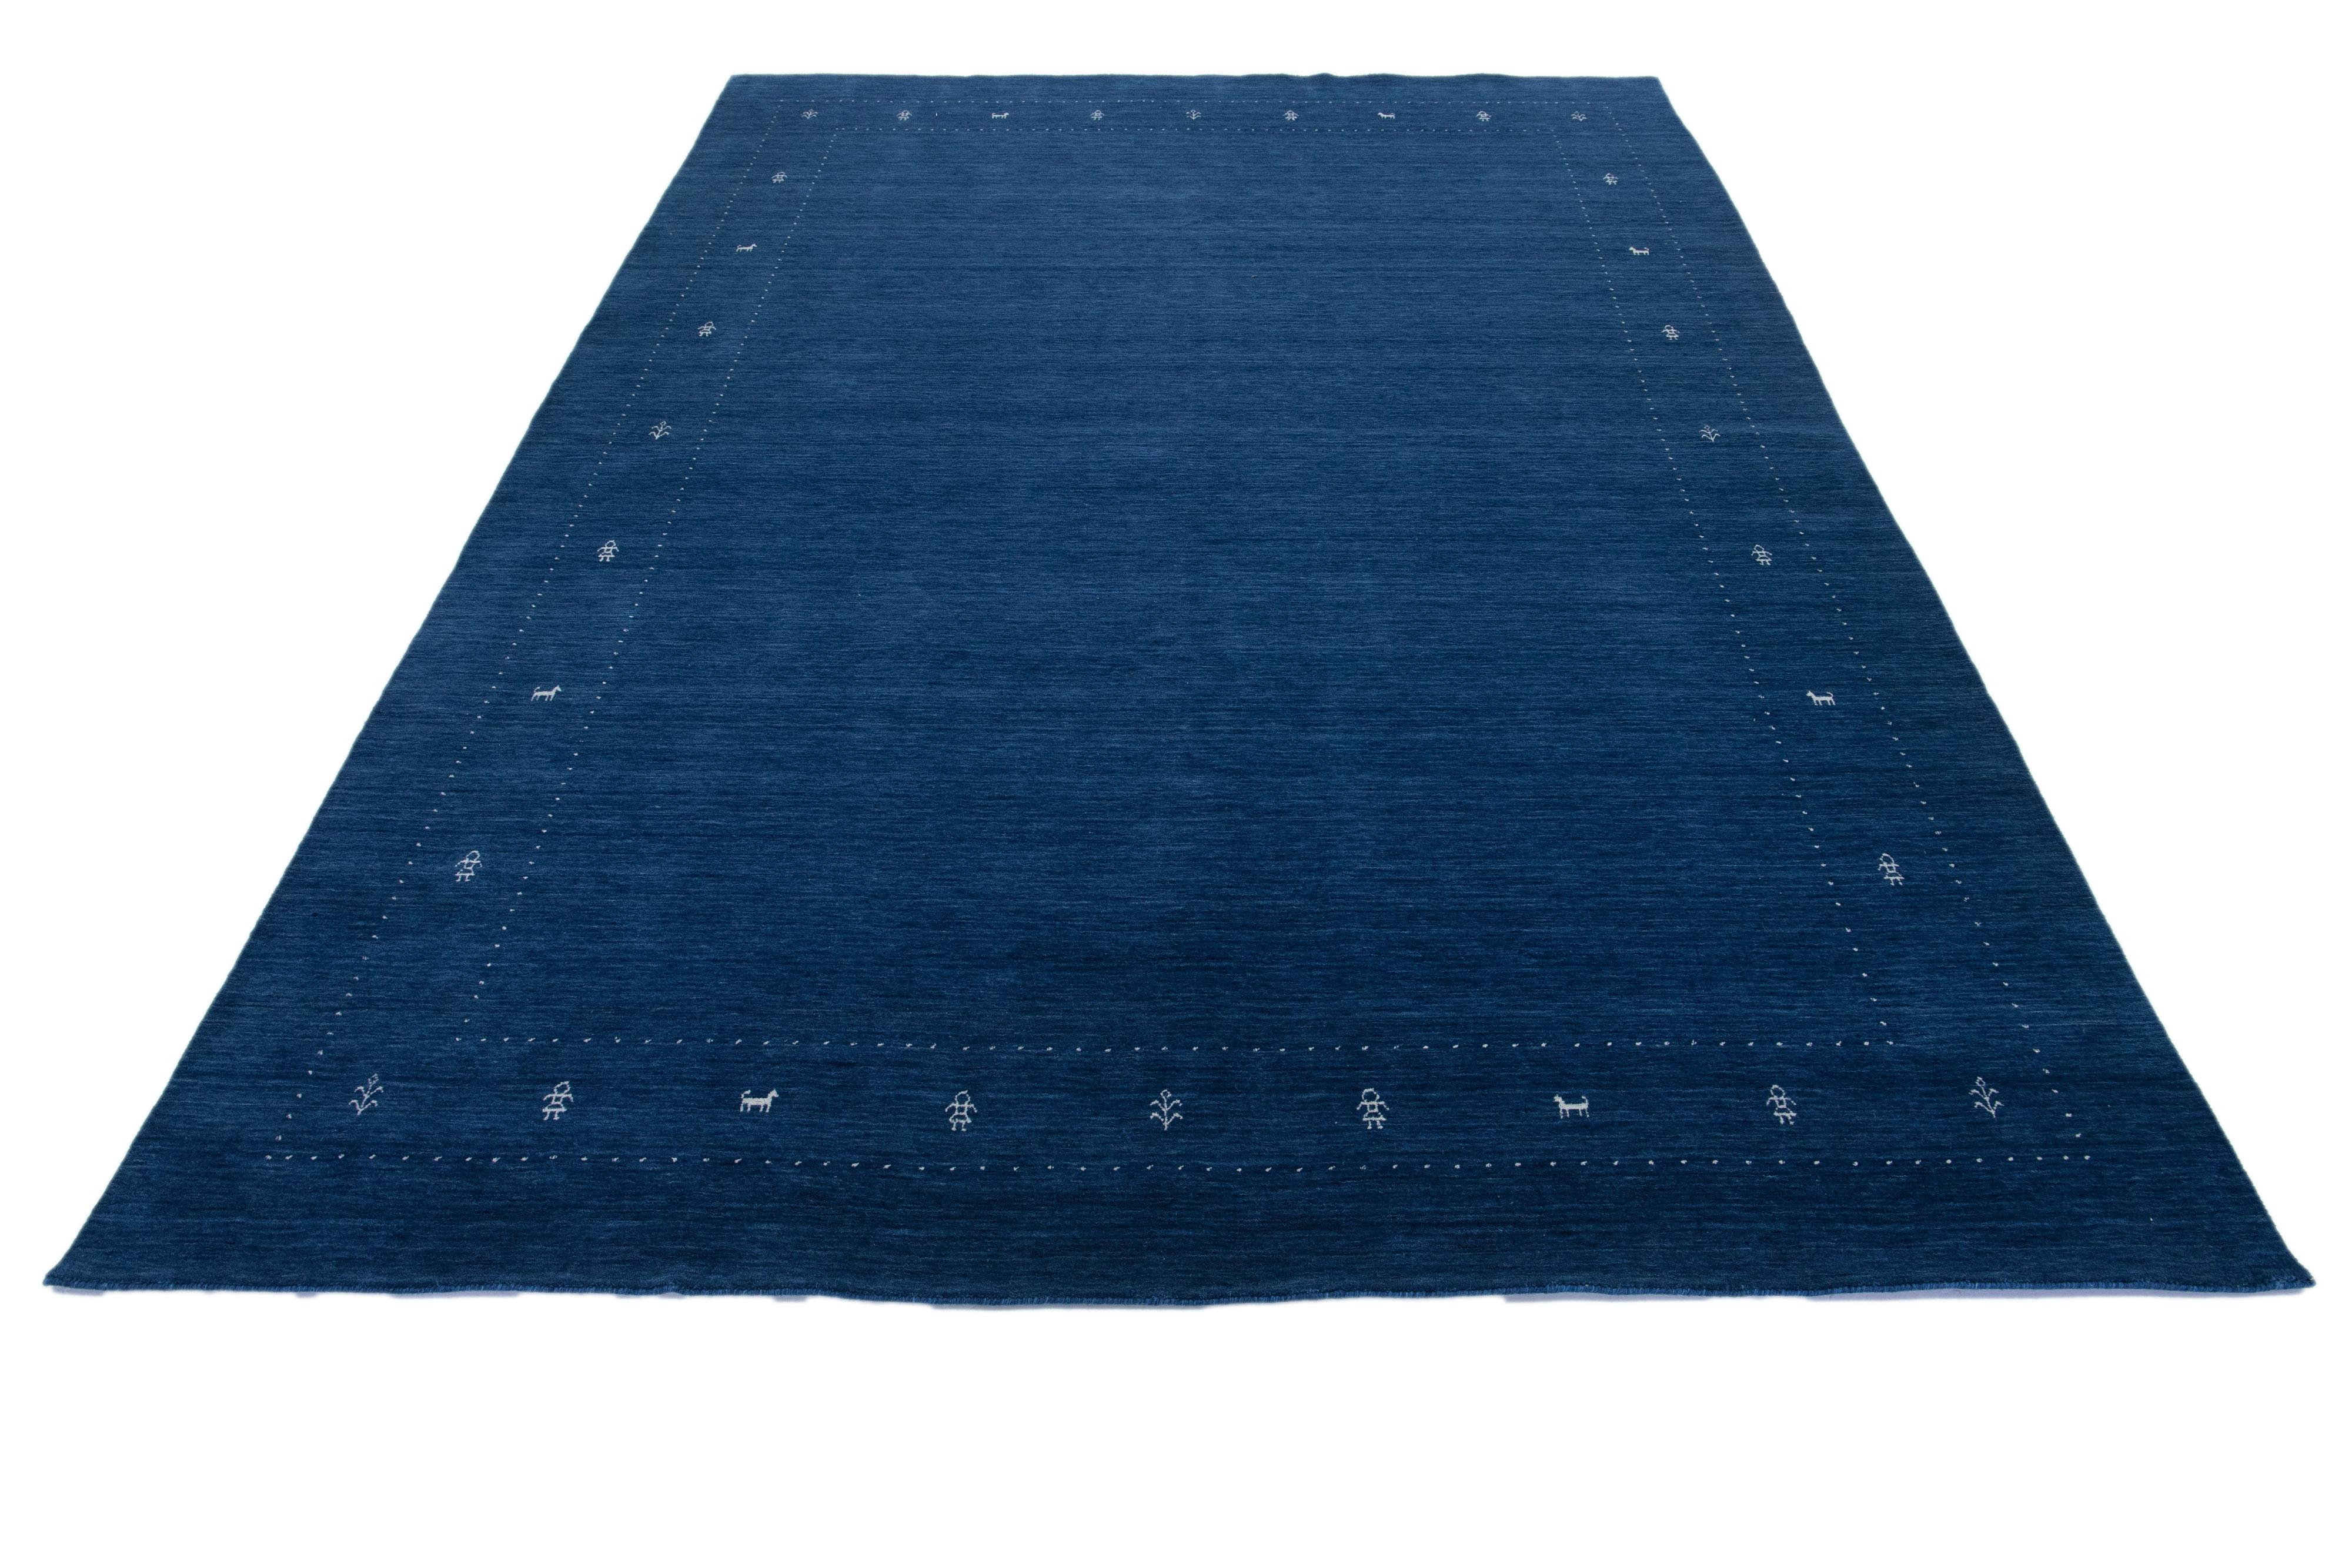 This modern Gabbeh rug is hand-loomed with a contemporary minimalist geometric pattern. The blue base is accented with white details.

This rug measures 10' x 13'9